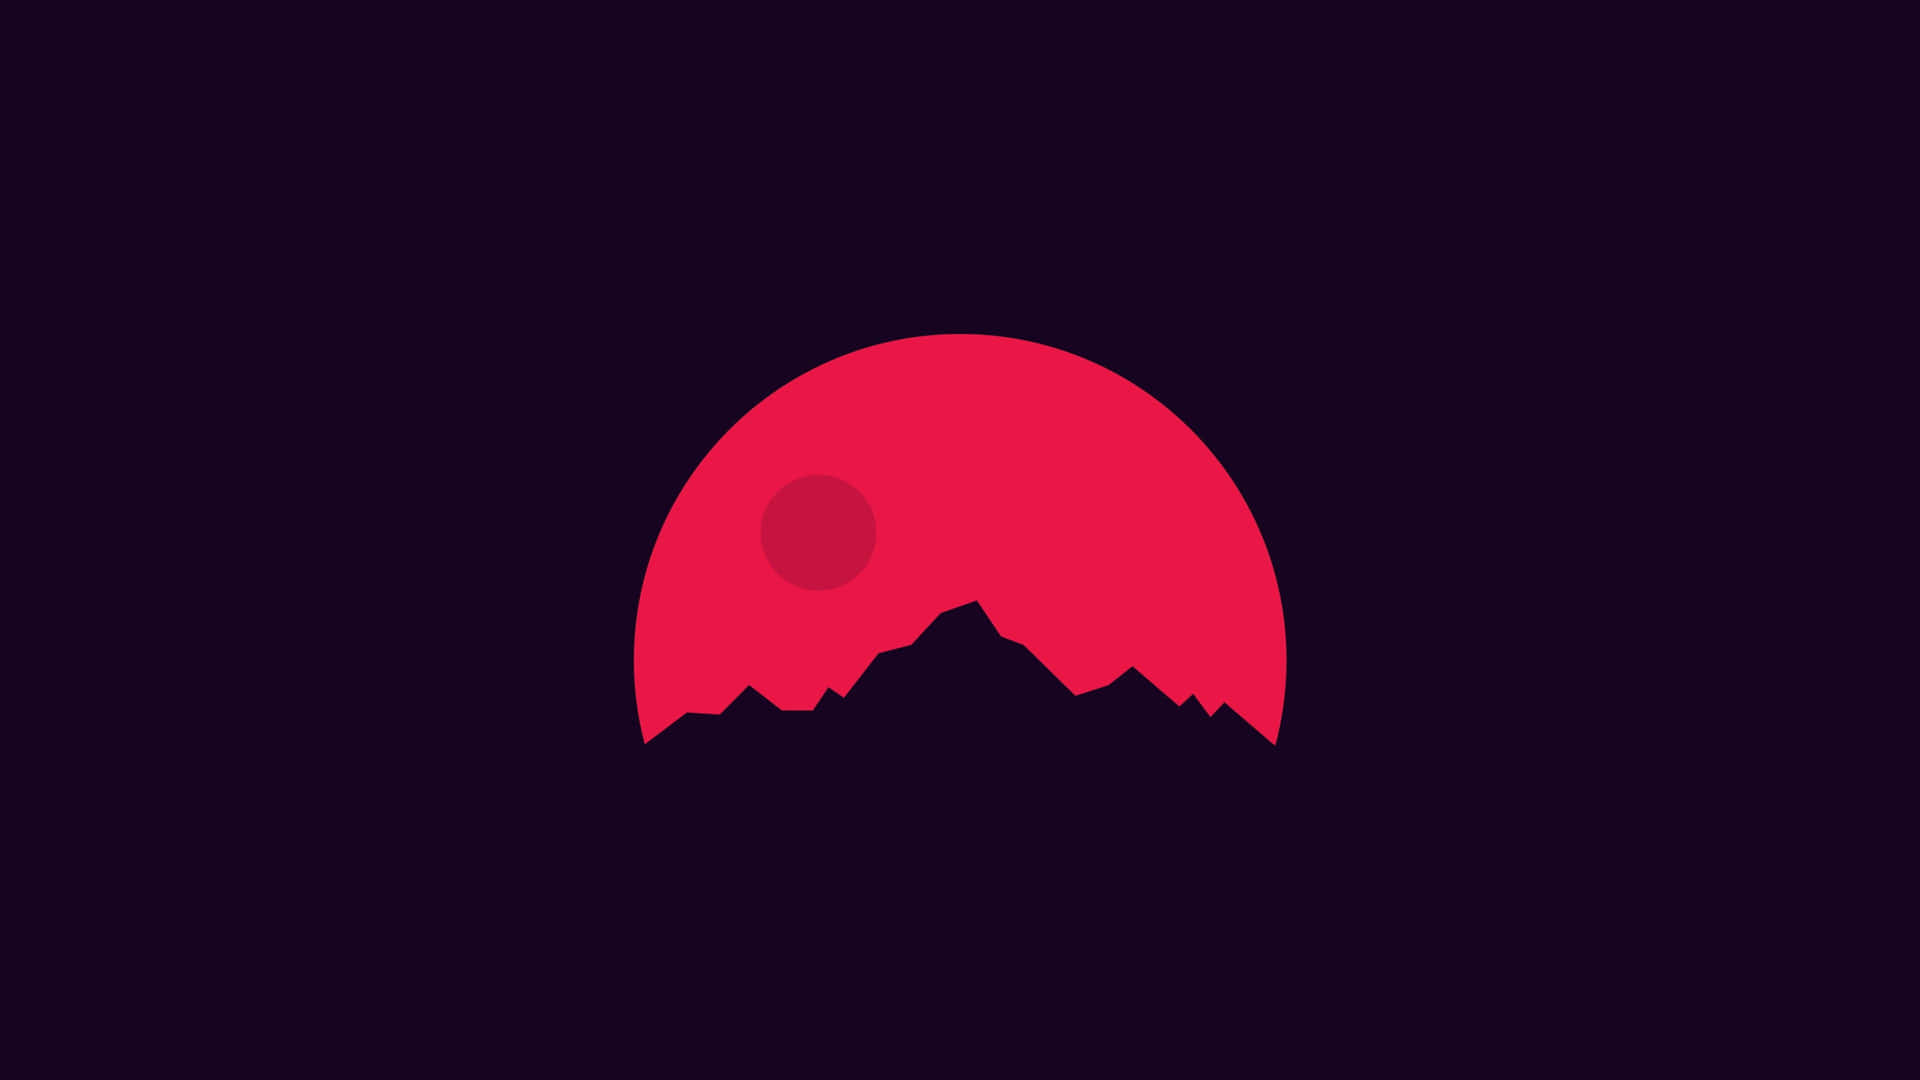 Red Moon Over Mountain Peaks Wallpaper